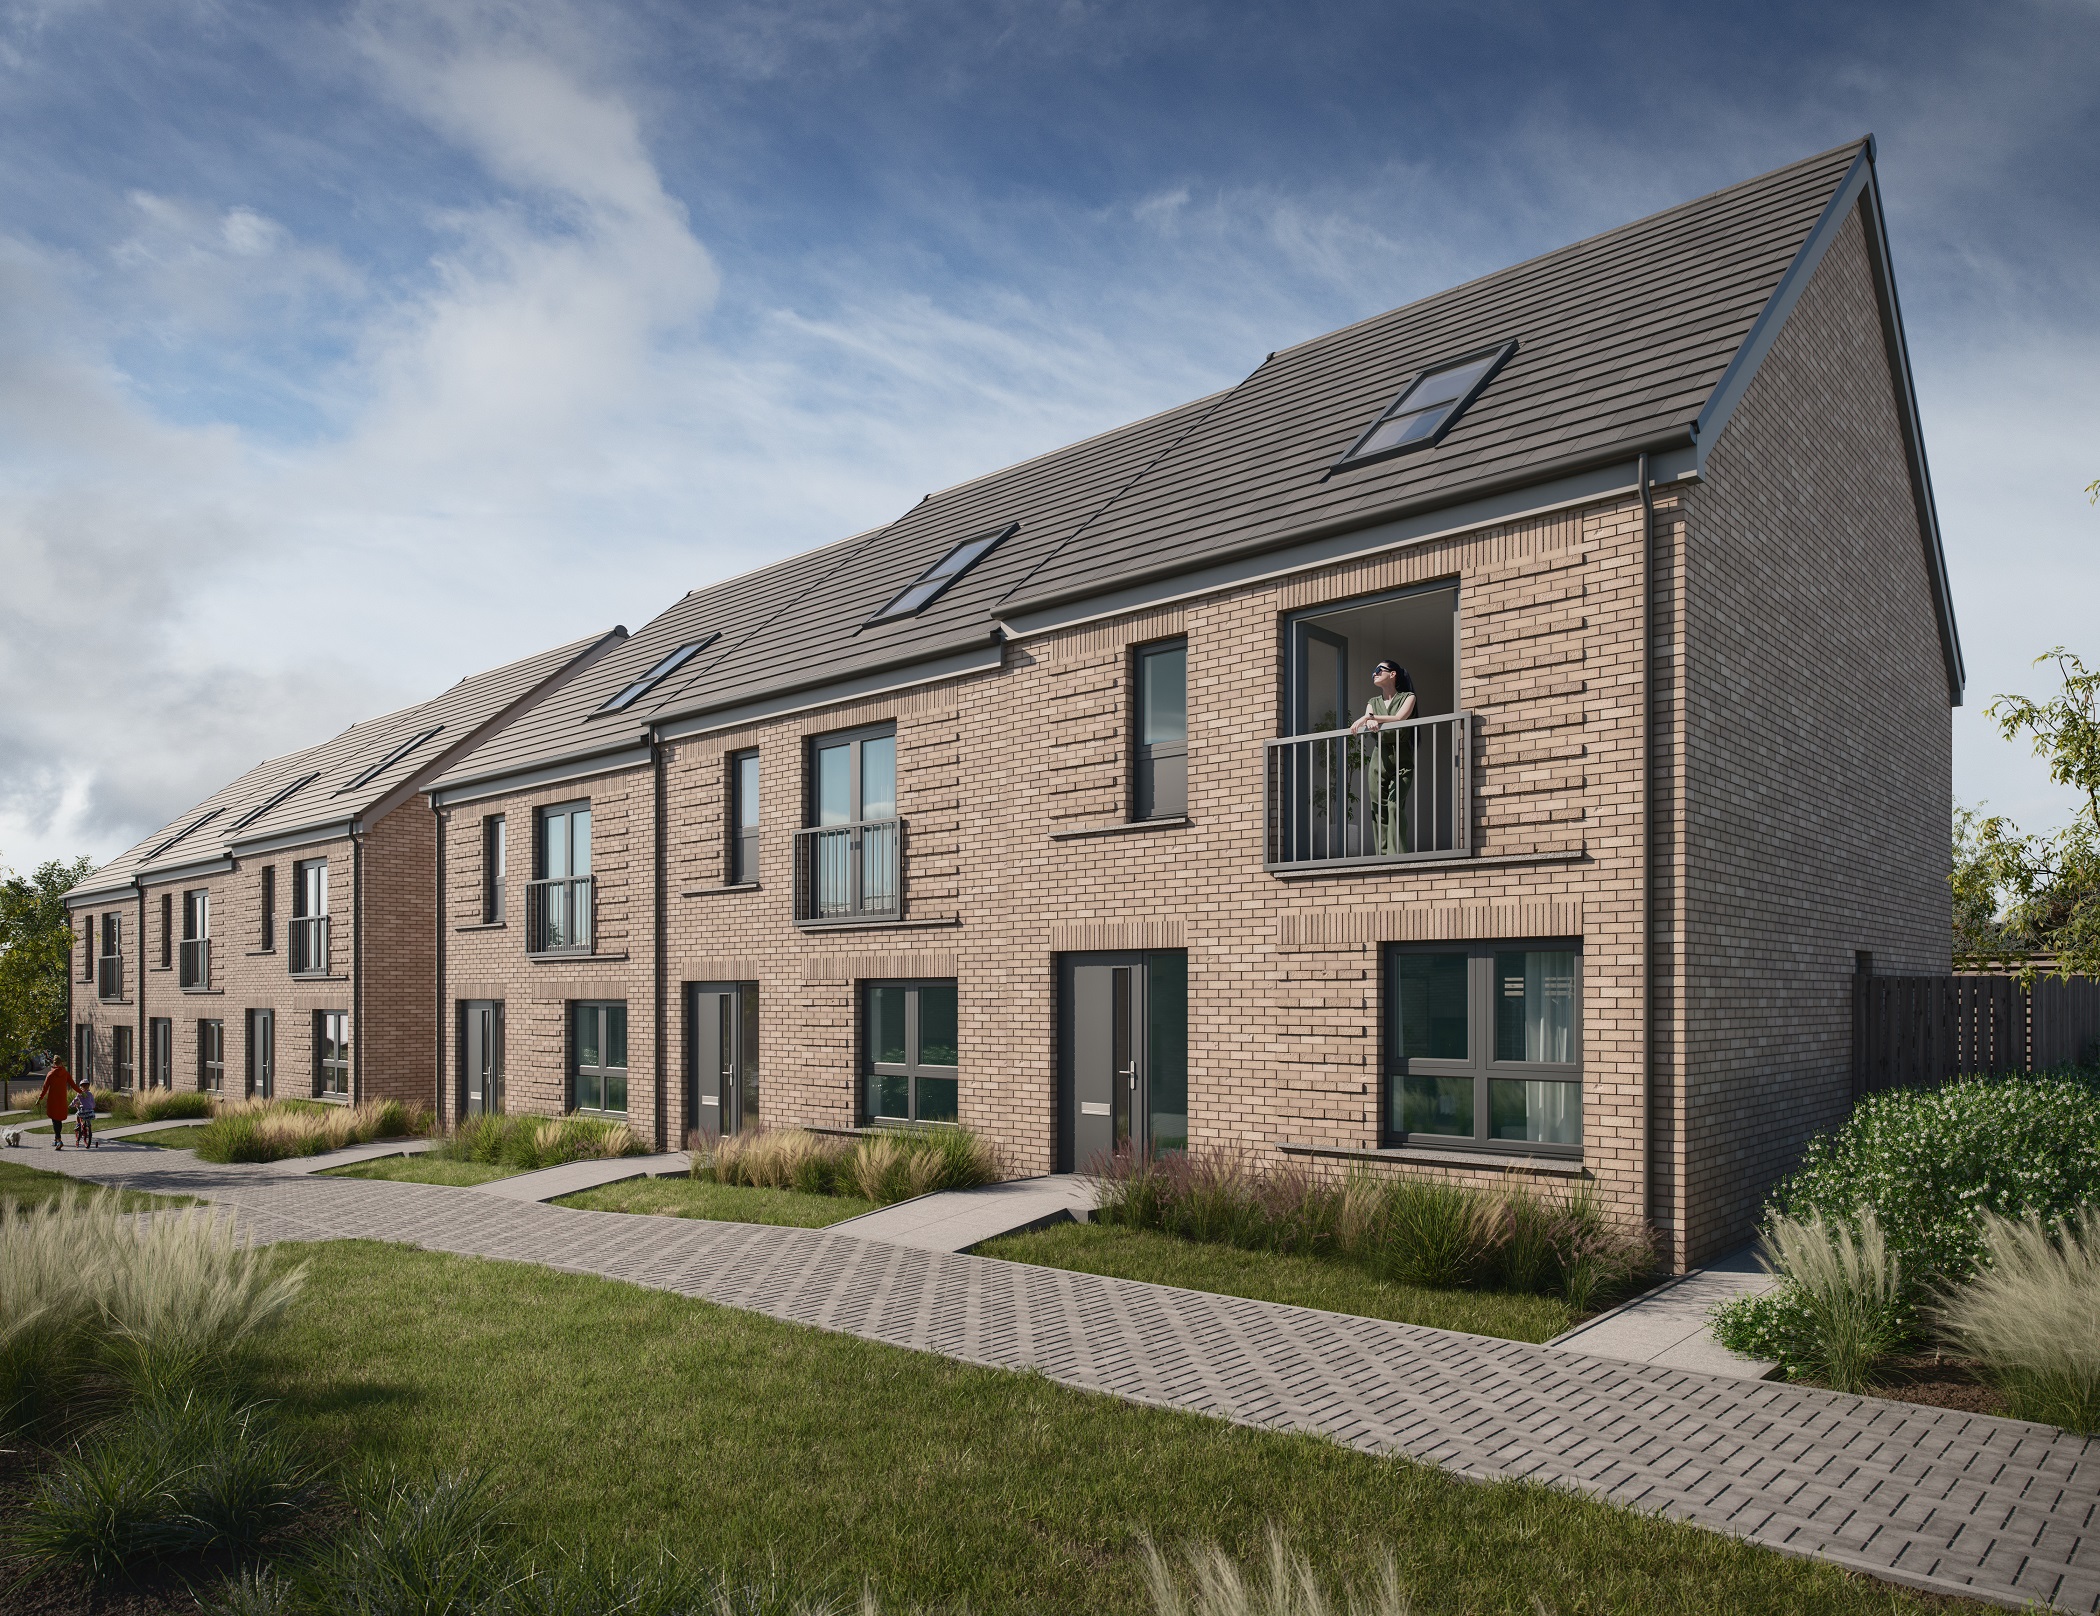 CCG launches new homes in Greenock